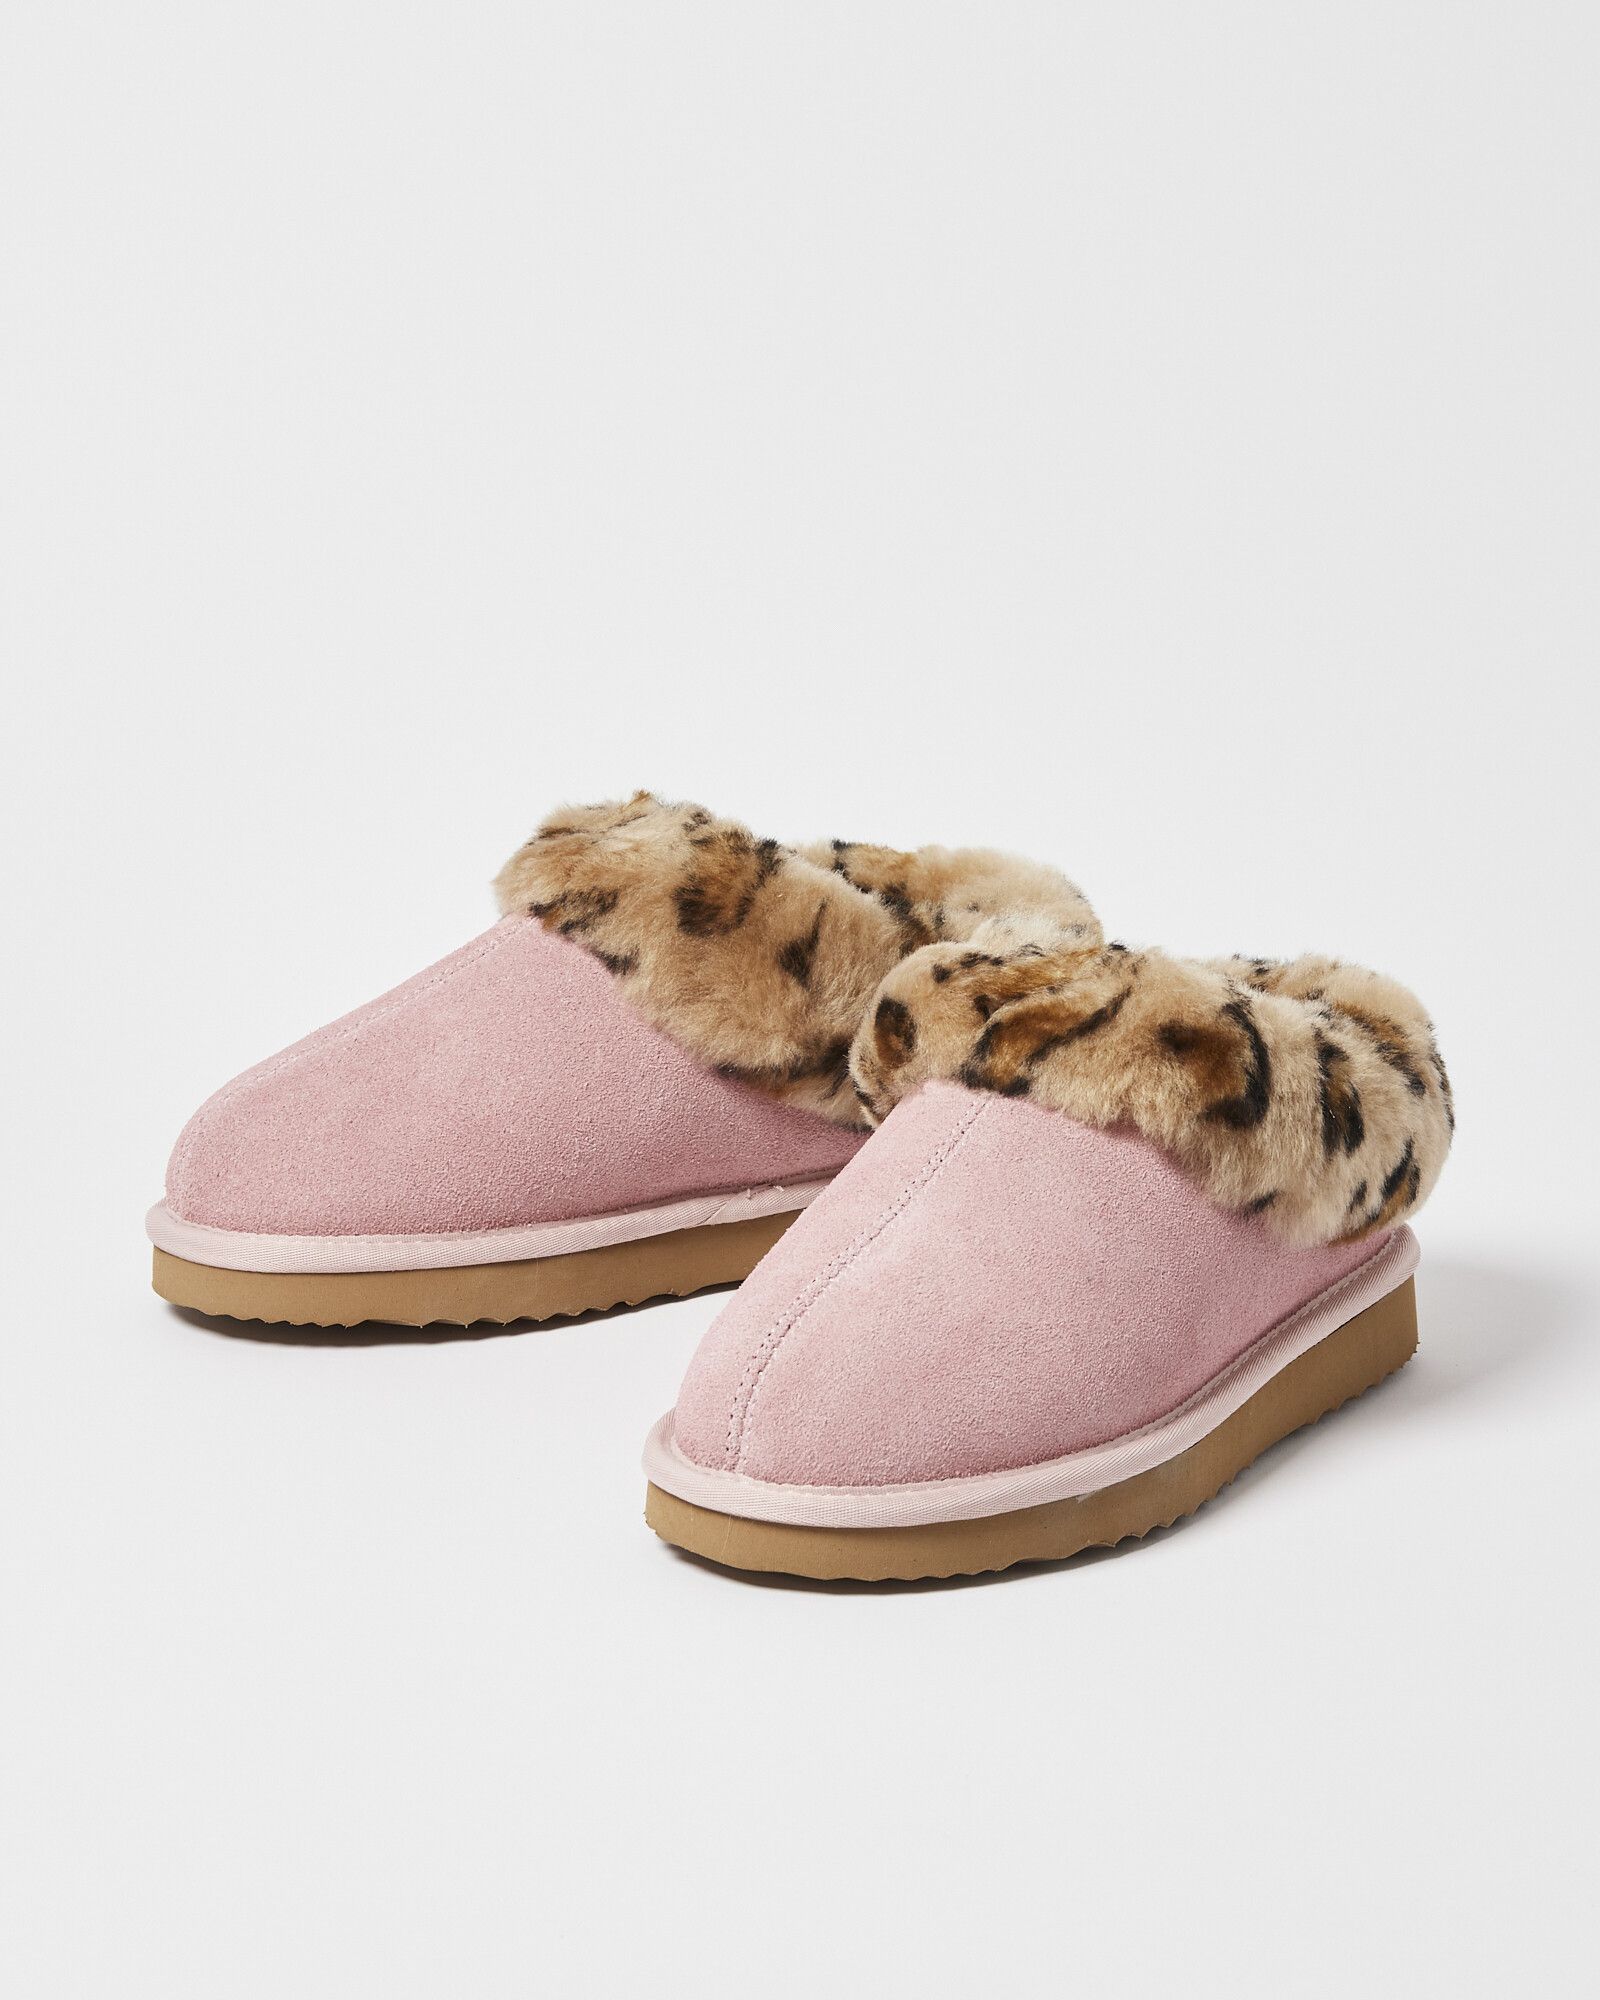 Animal Spot & Pink Suede Sheepskin Leather Bootie Slippers | Oliver Bonas US